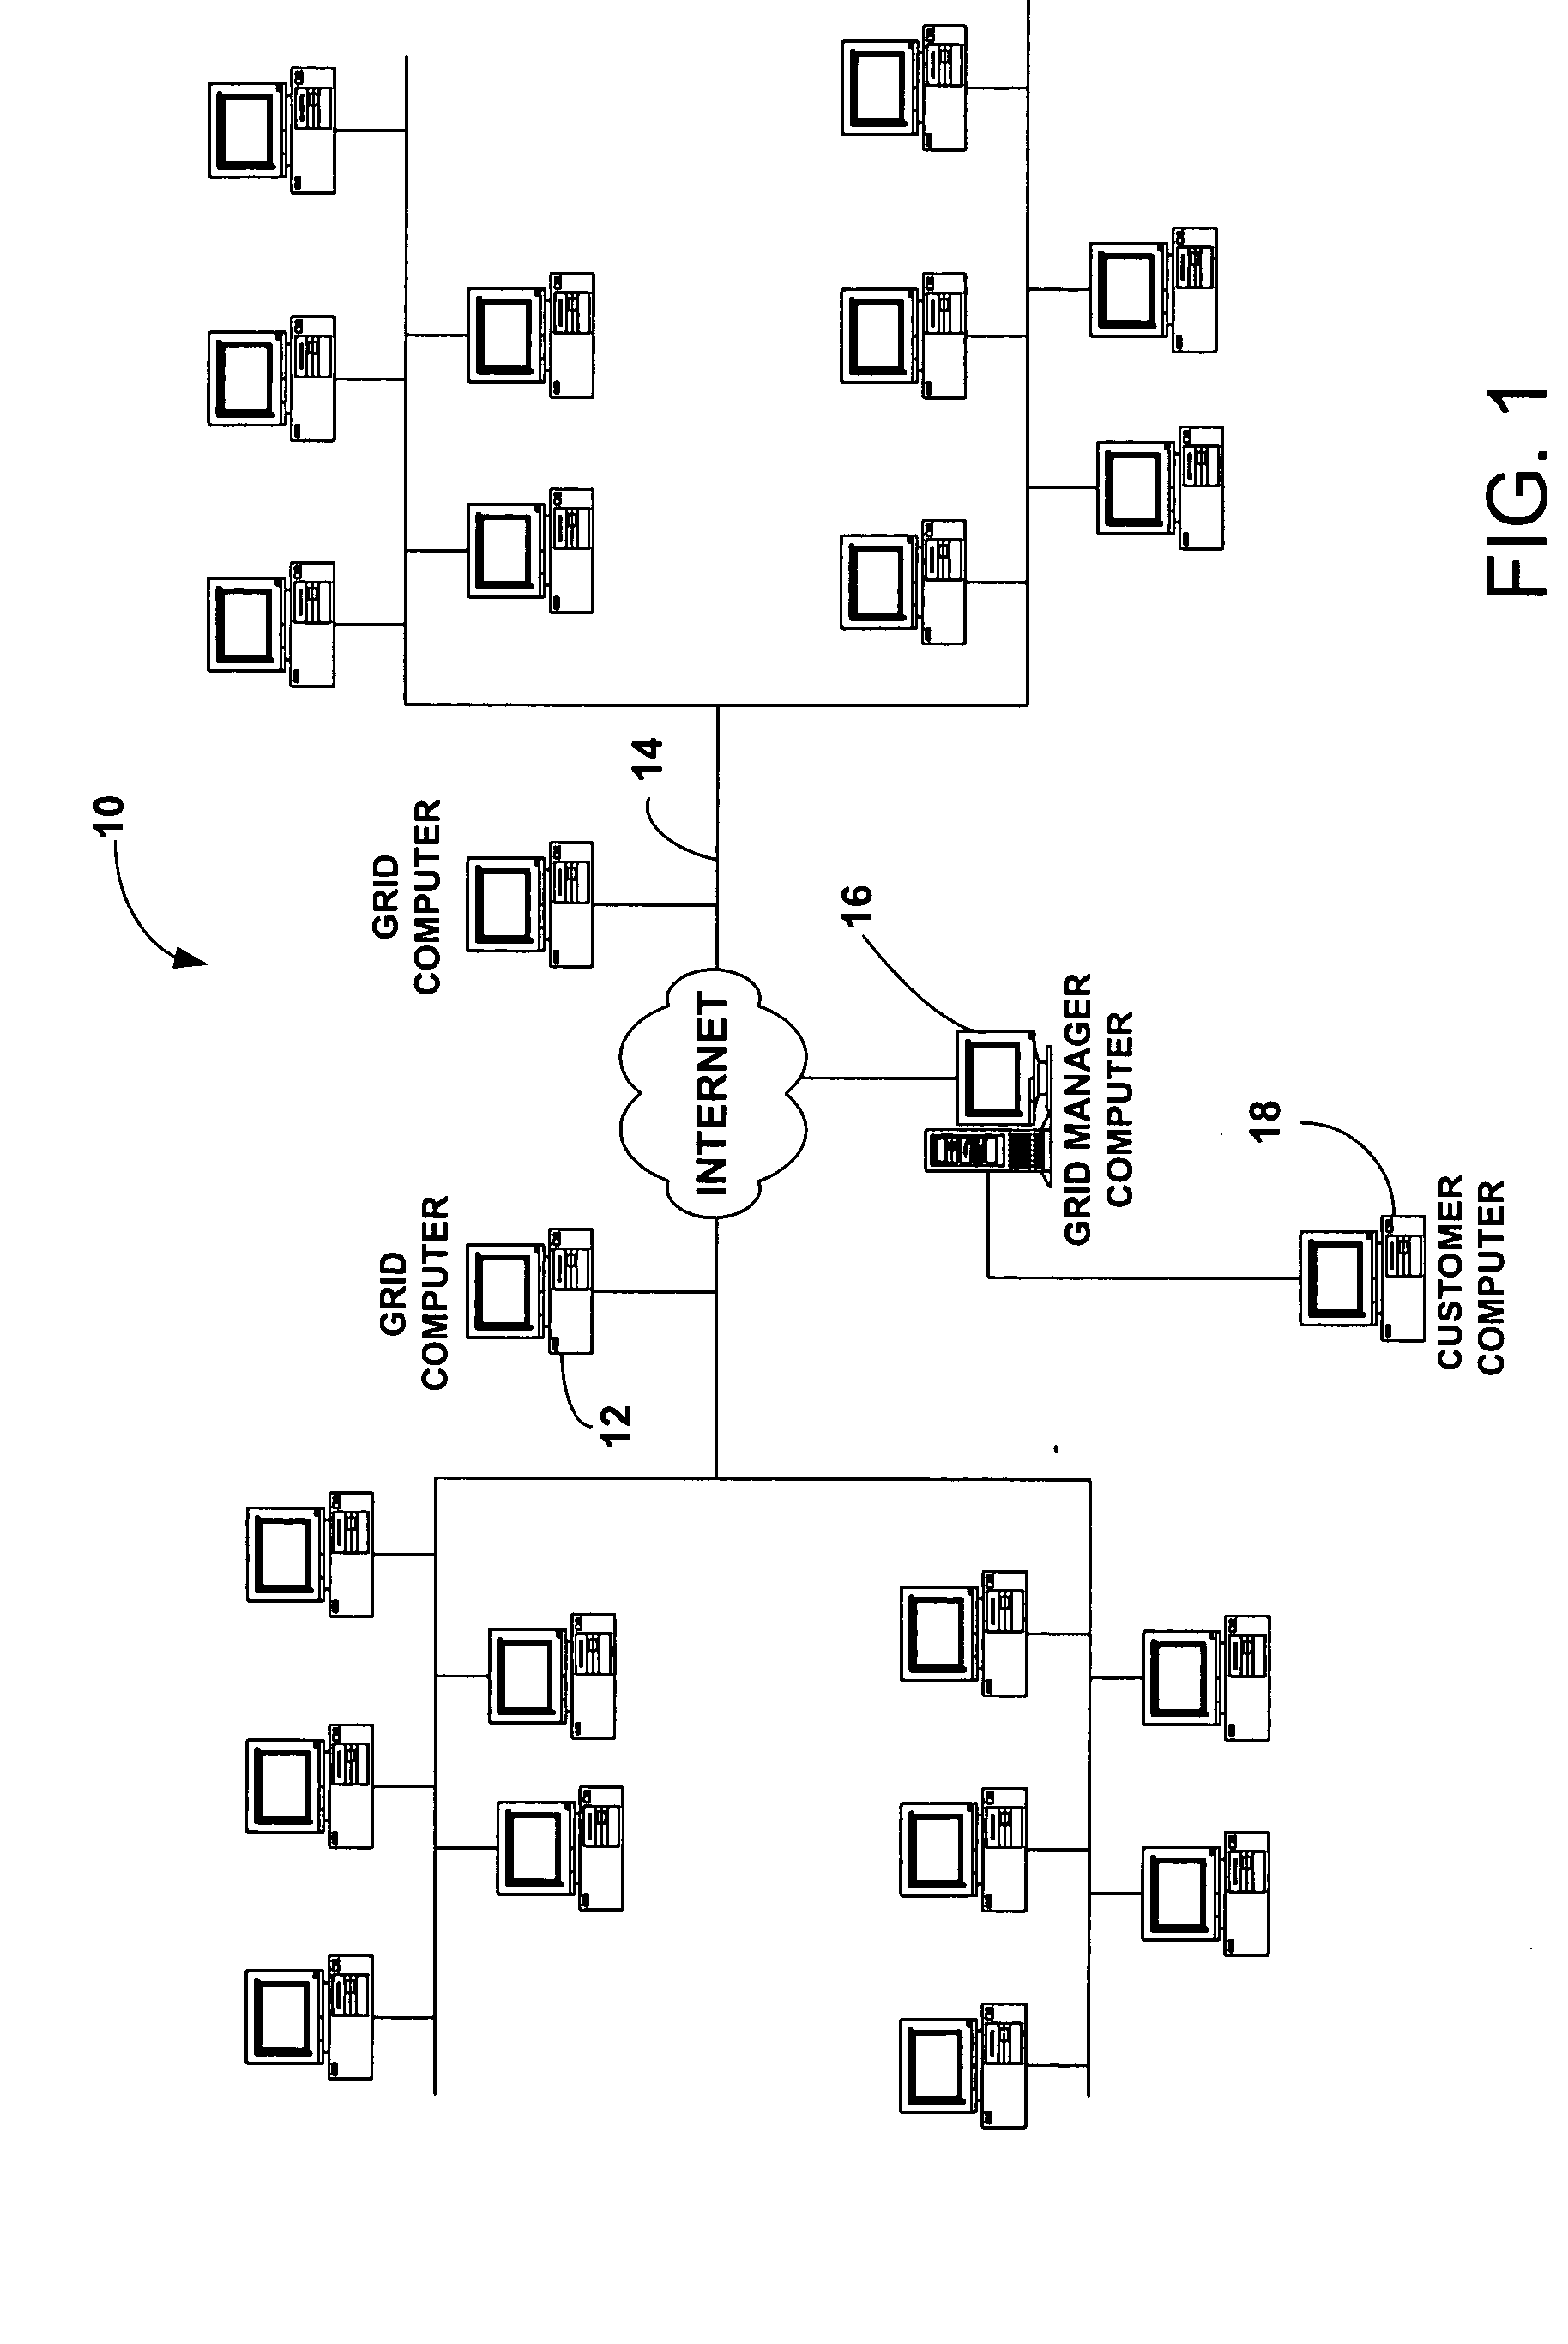 System for consolidating disk storage space of grid computers into a single virtual disk drive